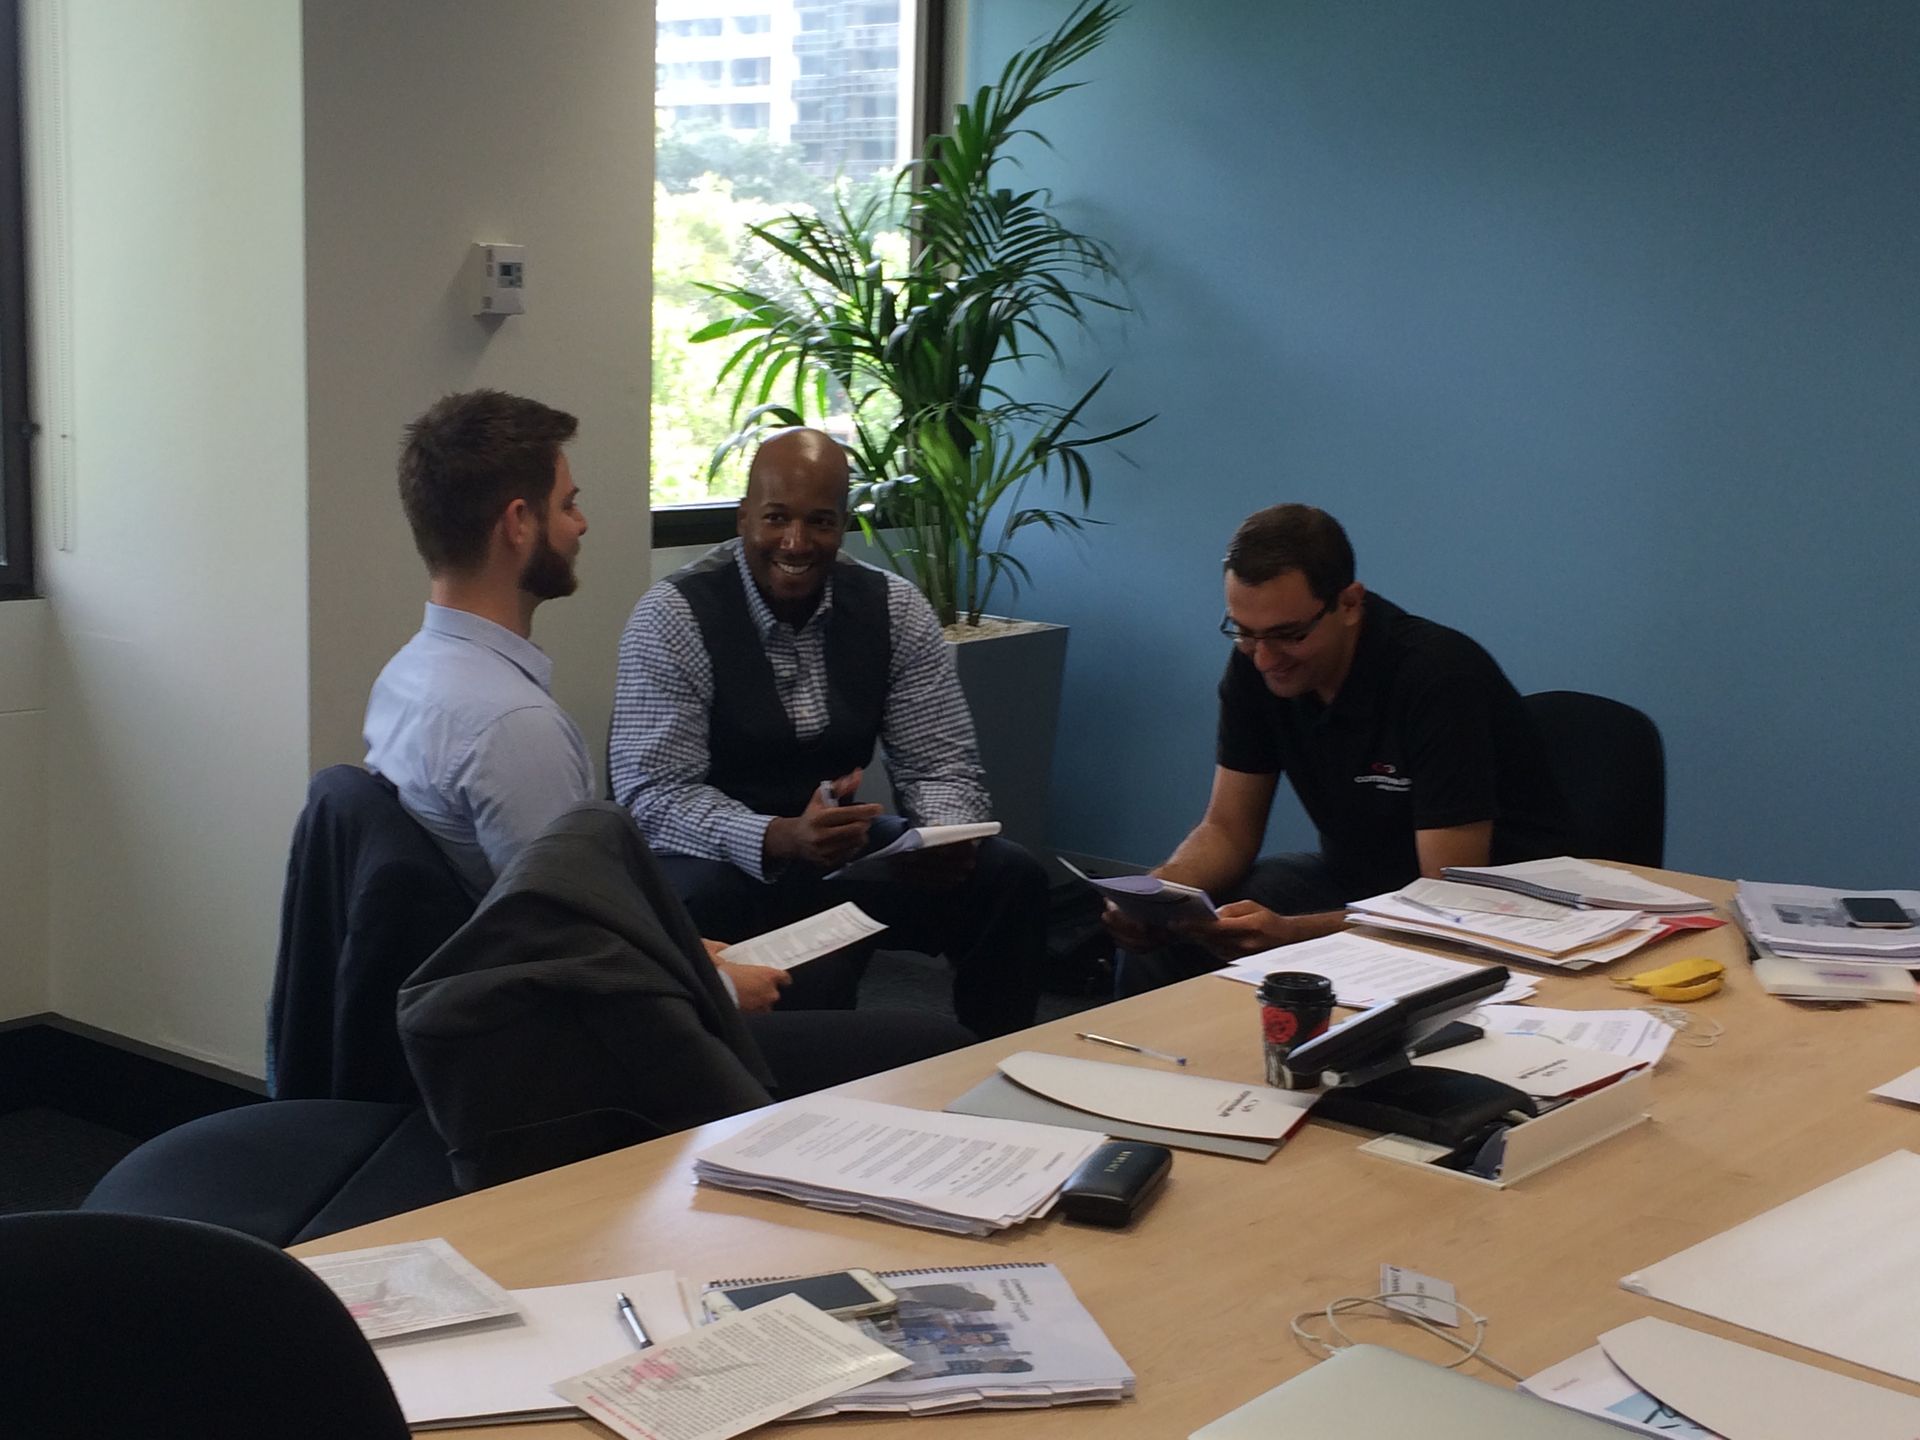 Meeting with Business Leaders in Sydney, Australia office